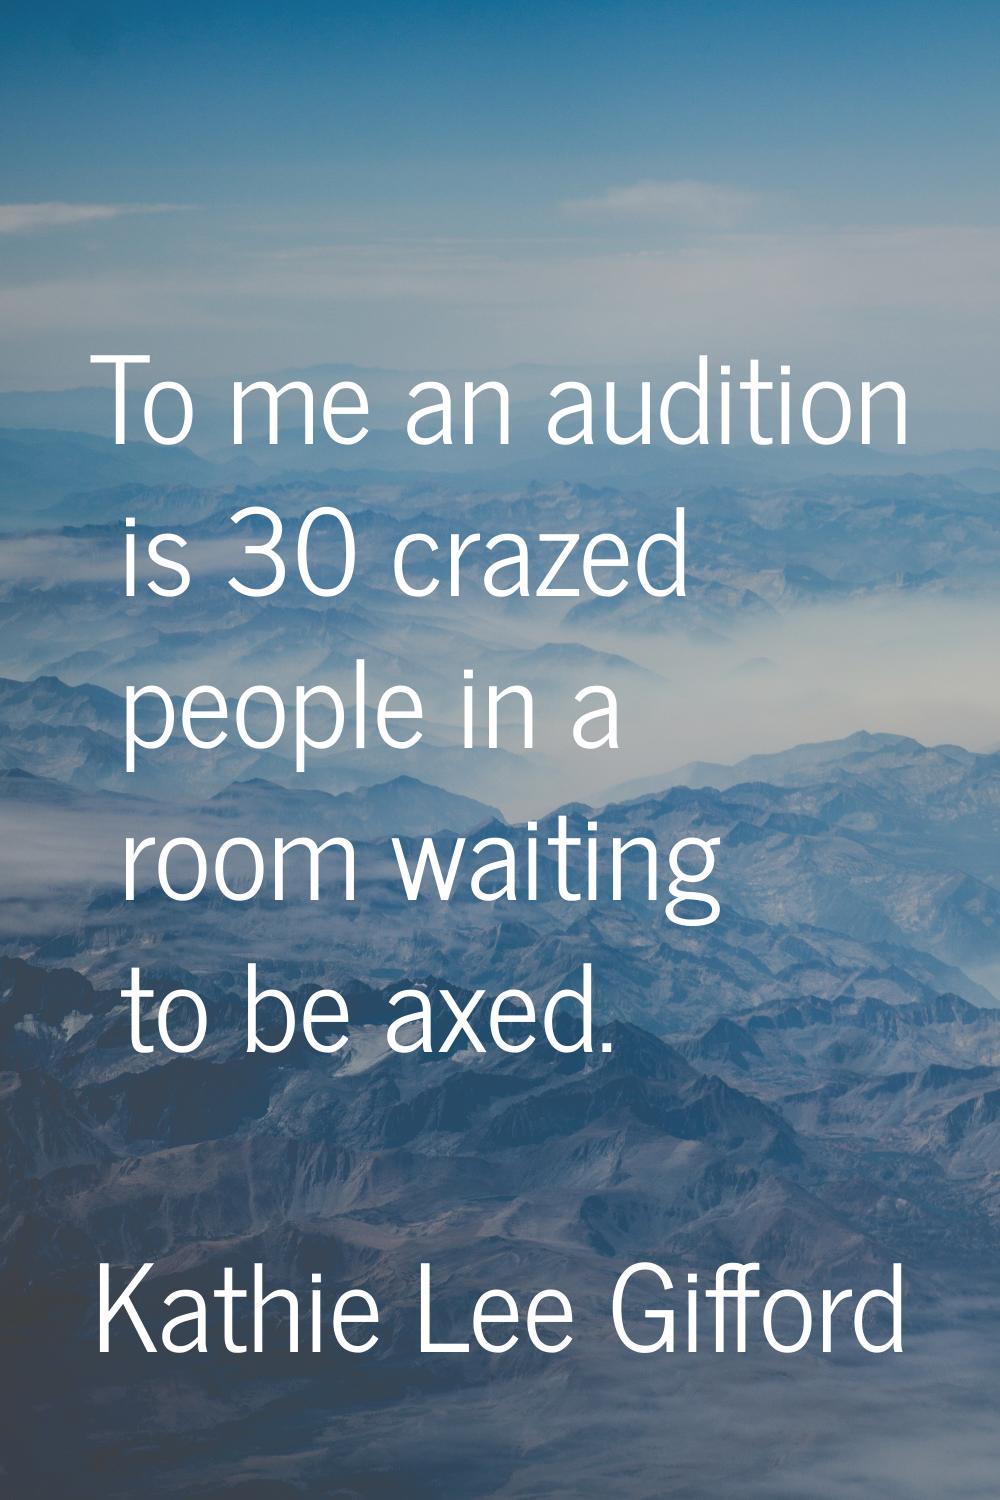 To me an audition is 30 crazed people in a room waiting to be axed.